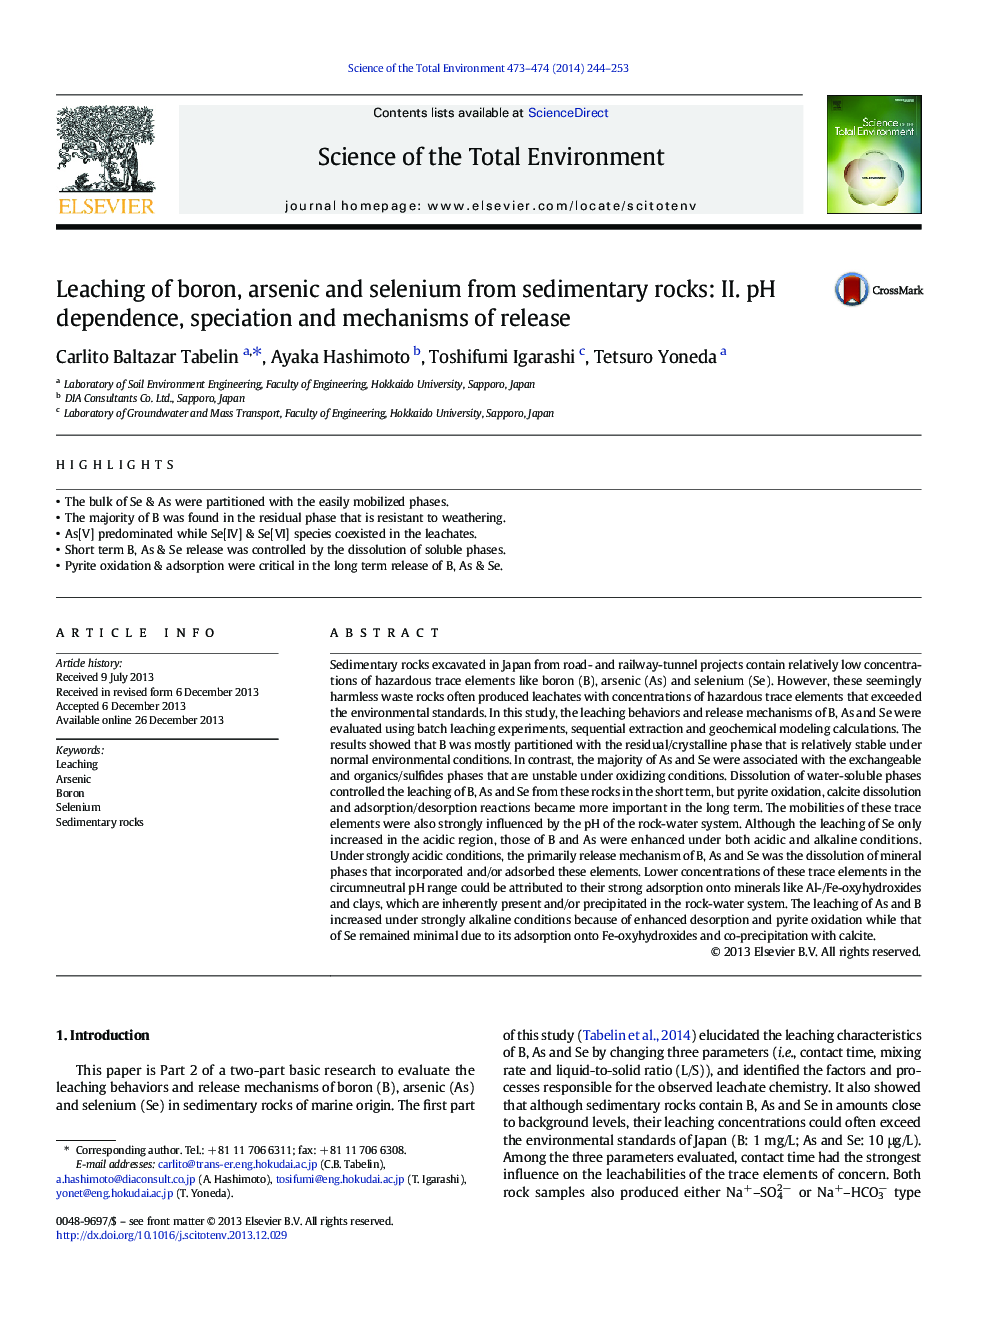 Leaching of boron, arsenic and selenium from sedimentary rocks: II. pH dependence, speciation and mechanisms of release